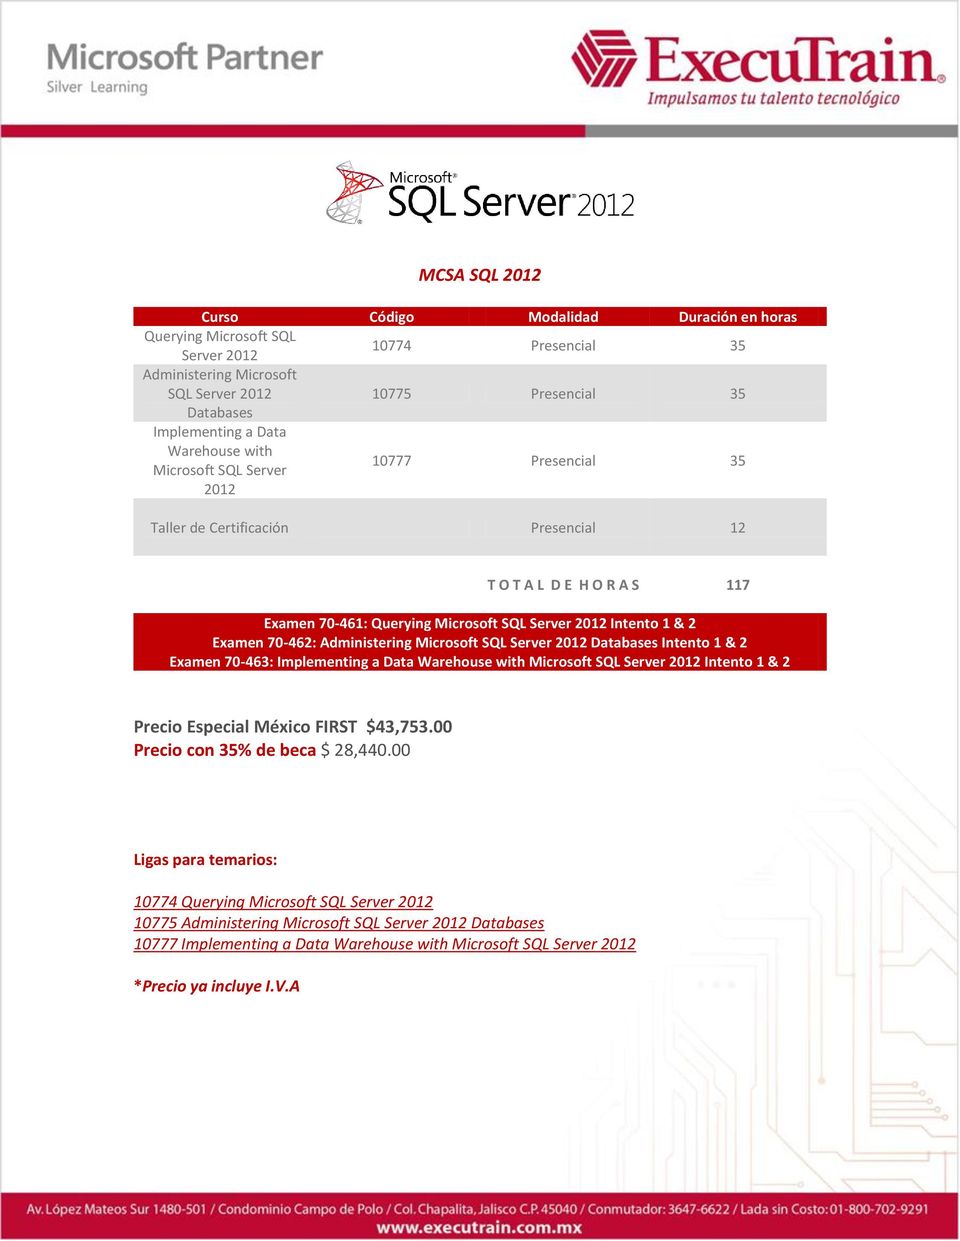 70-462: Administering Microsoft SQL Server 2012 Databases Intento 1 & 2 Examen 70-463: Implementing a Data Warehouse with Microsoft SQL Server 2012 Intento 1 & 2 Precio Especial México FIRST $43,753.